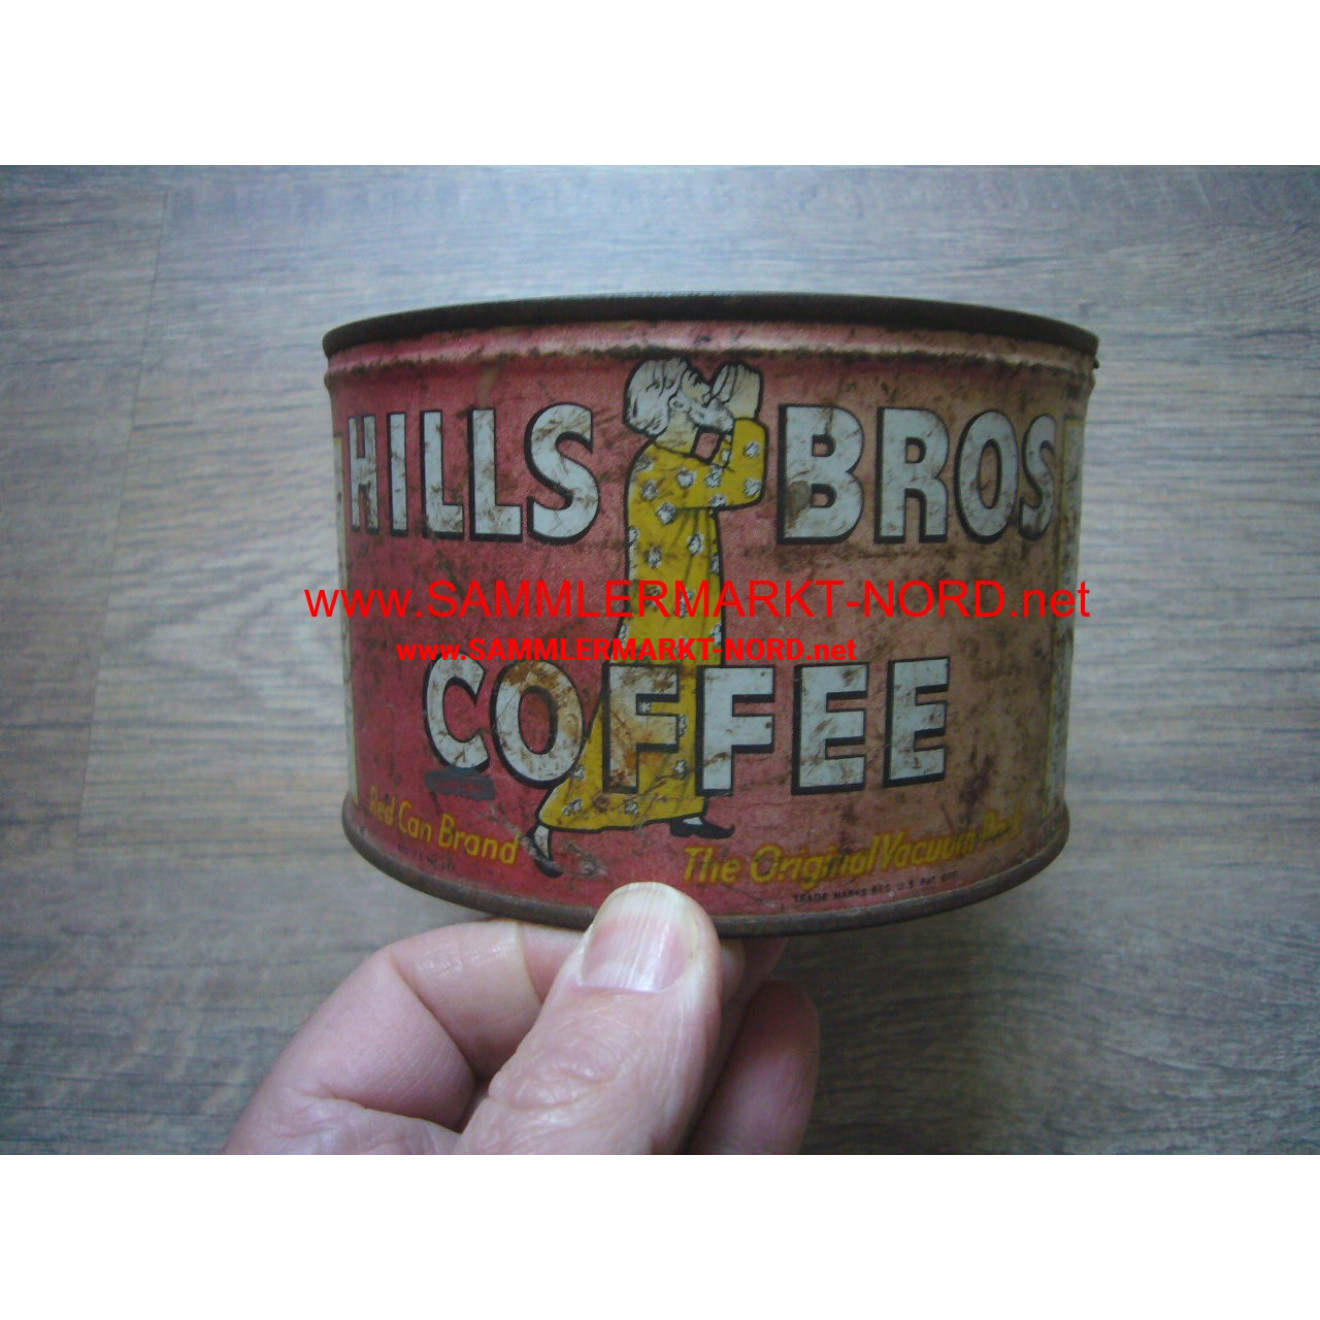 US Army - Hills Bros Coffee Dose